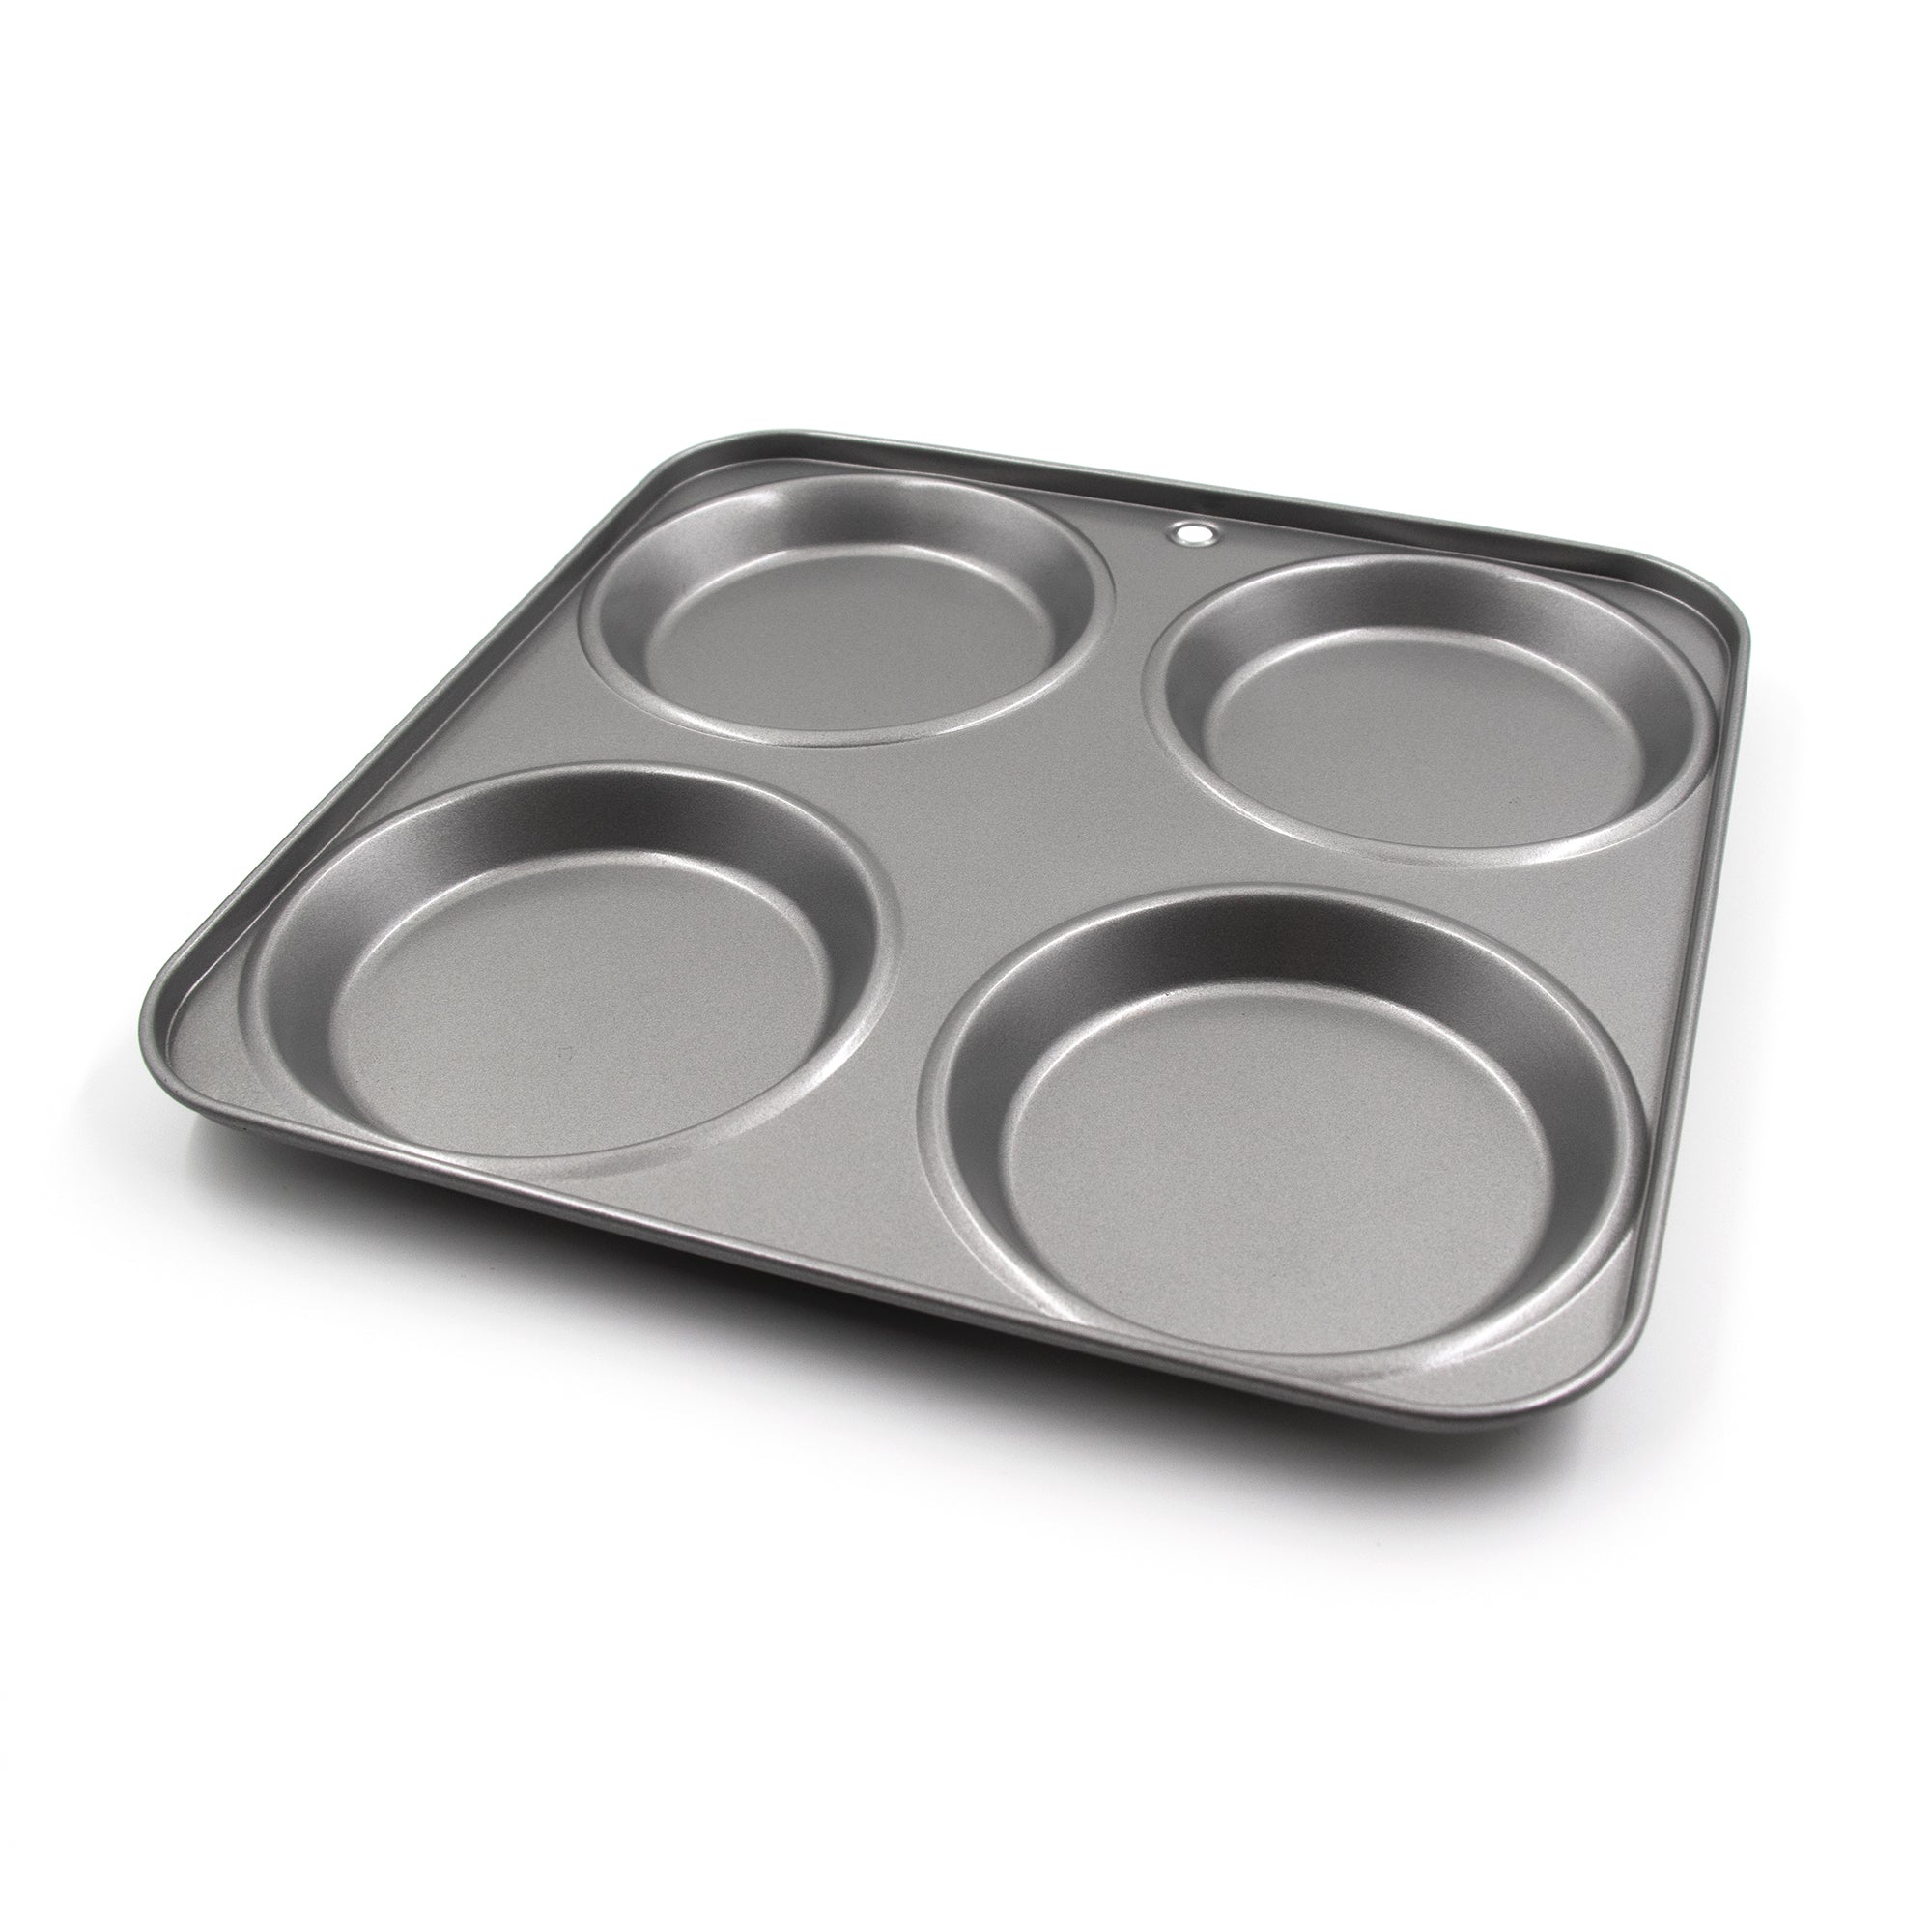 ALKO 4-cup Yorkshire pudding pan